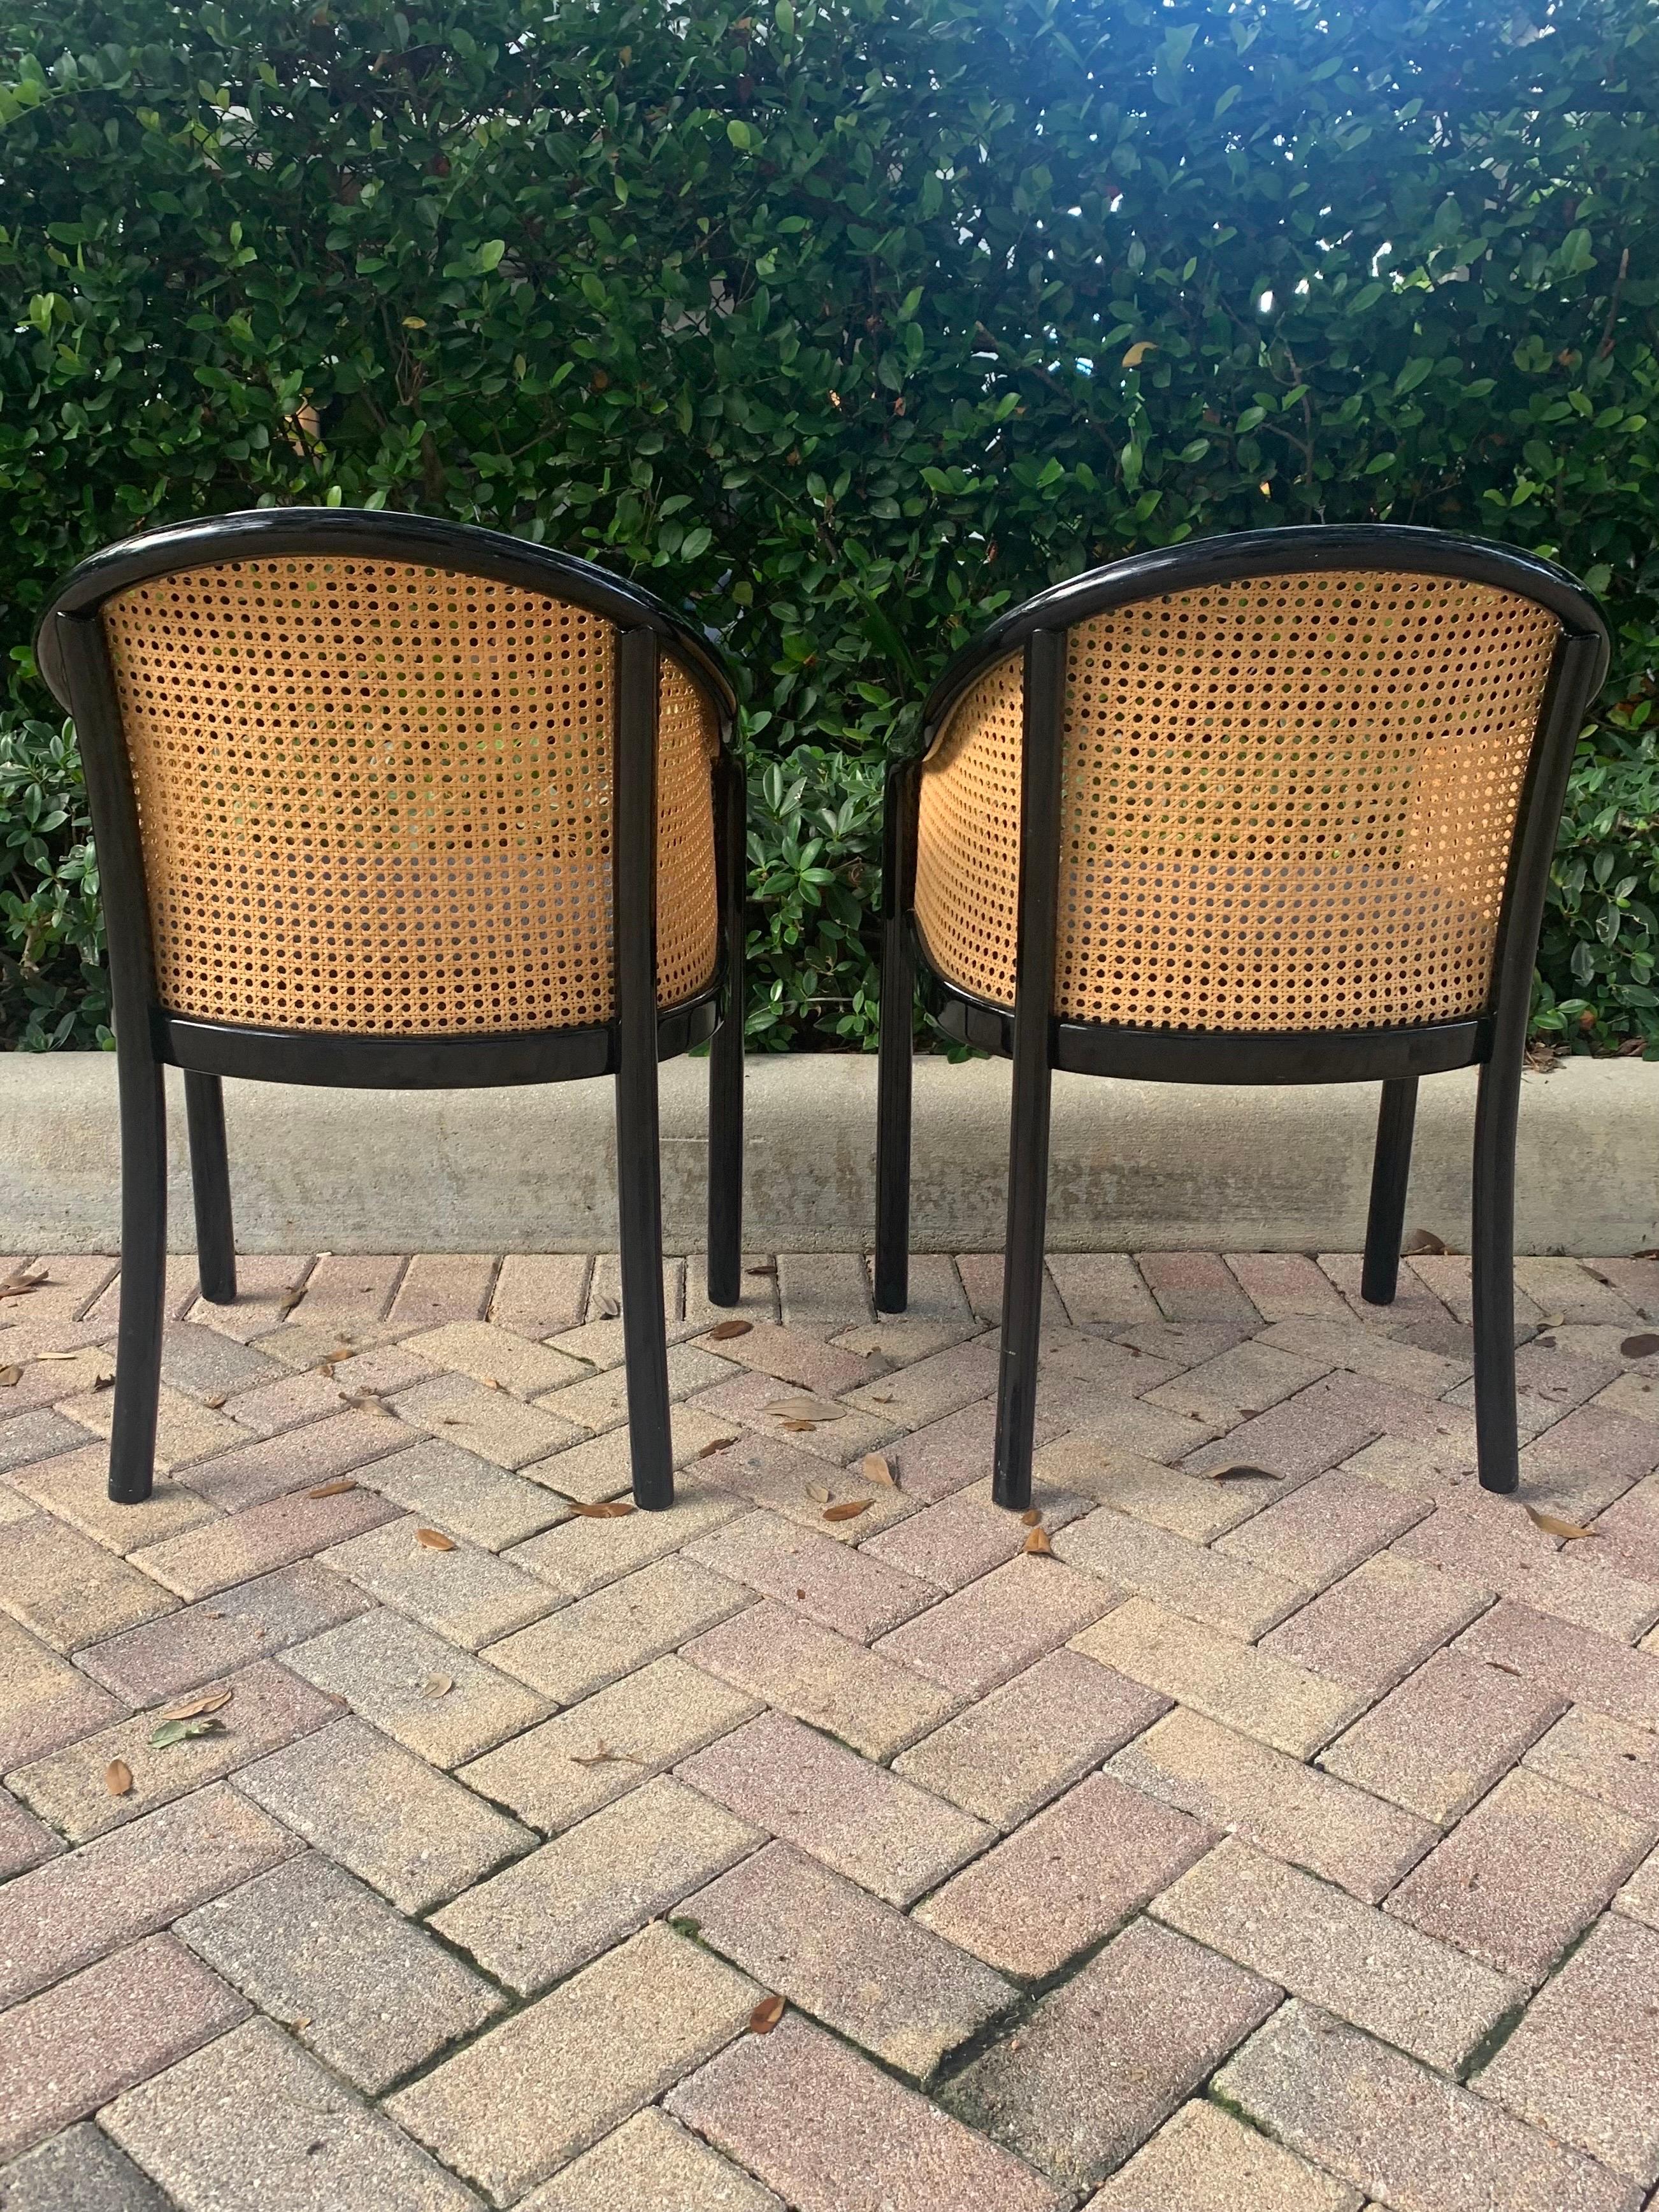 Italian Ward Bennett Landmark Style Lounge Chairs in Wood and Cane, a Pair For Sale